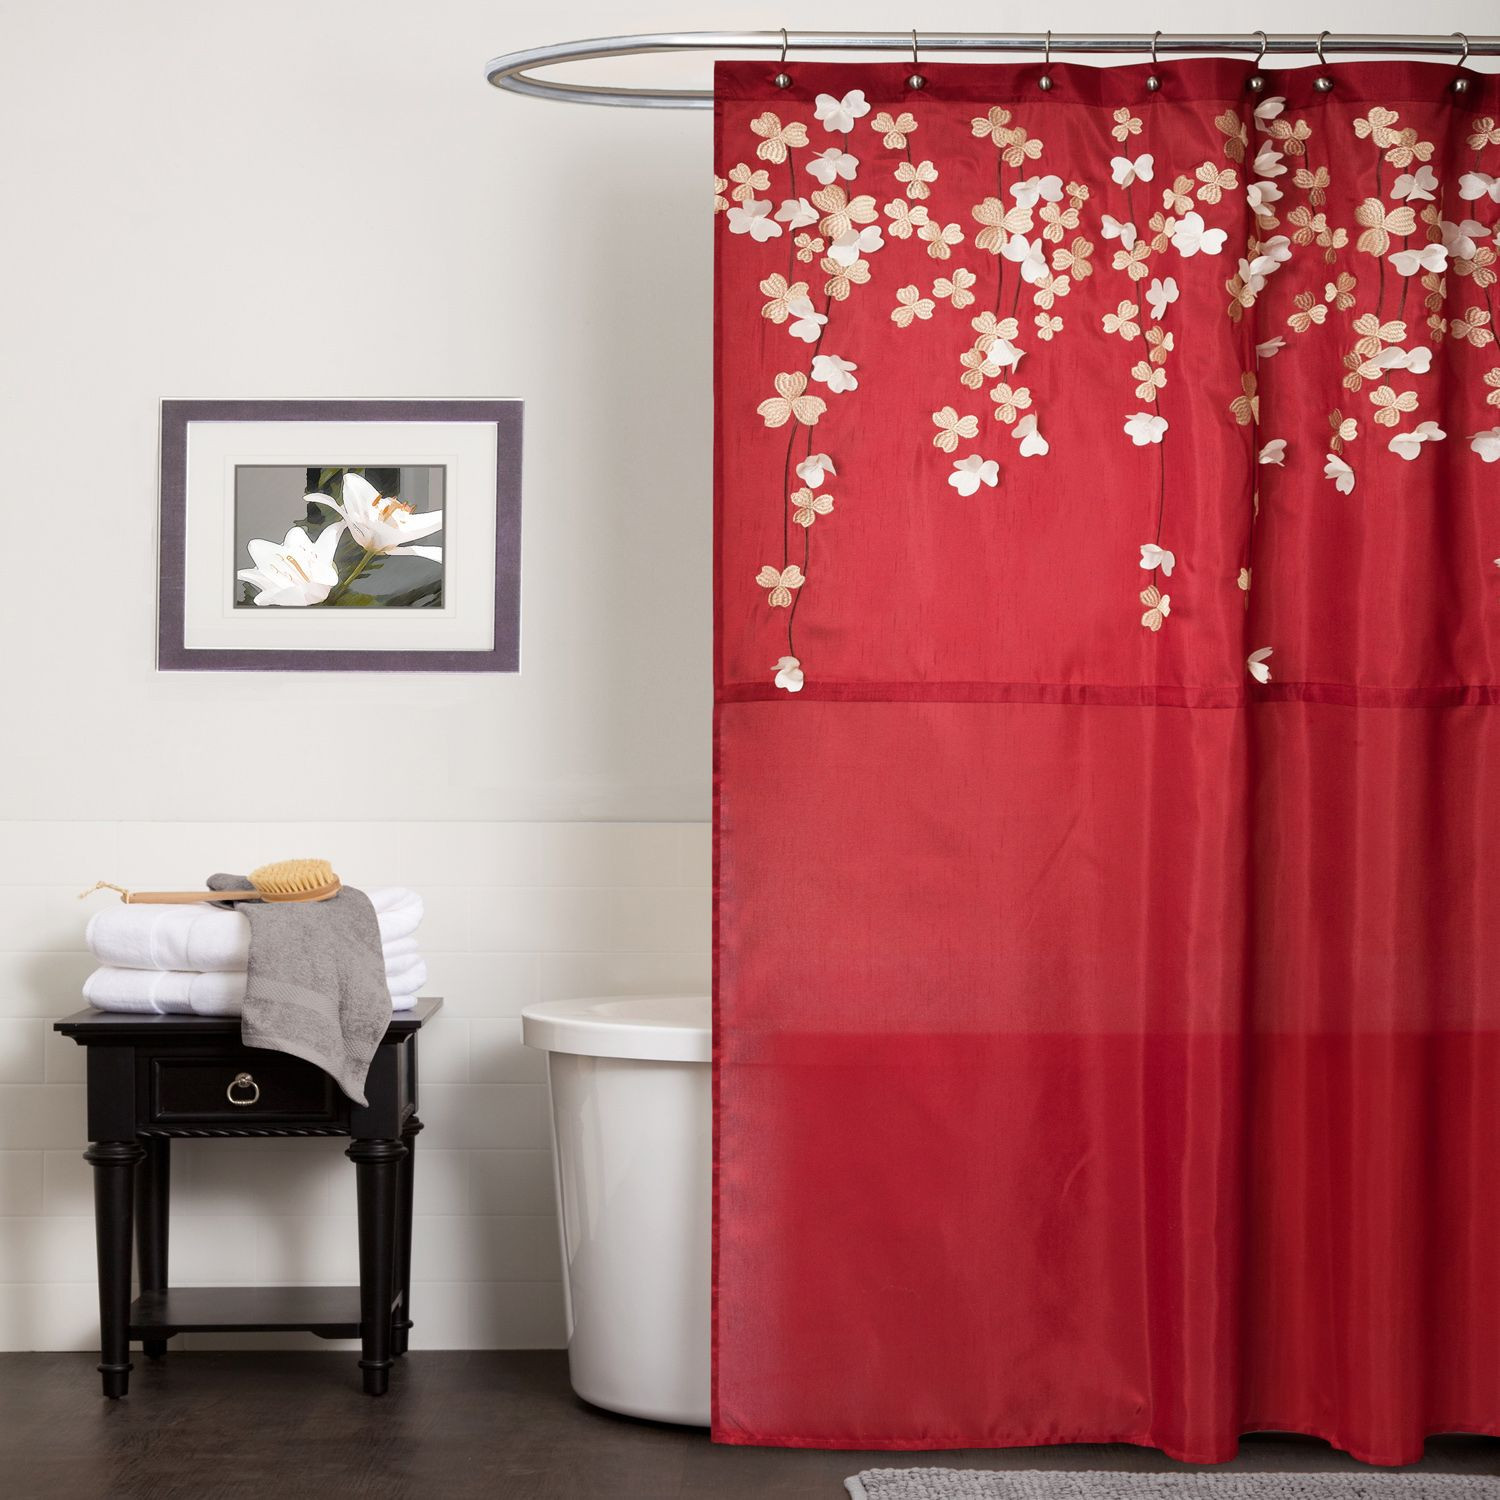 Bathroom Sets With Shower Curtain
 Lush Decor Flower Drop Red Shower Curtain Home Bed